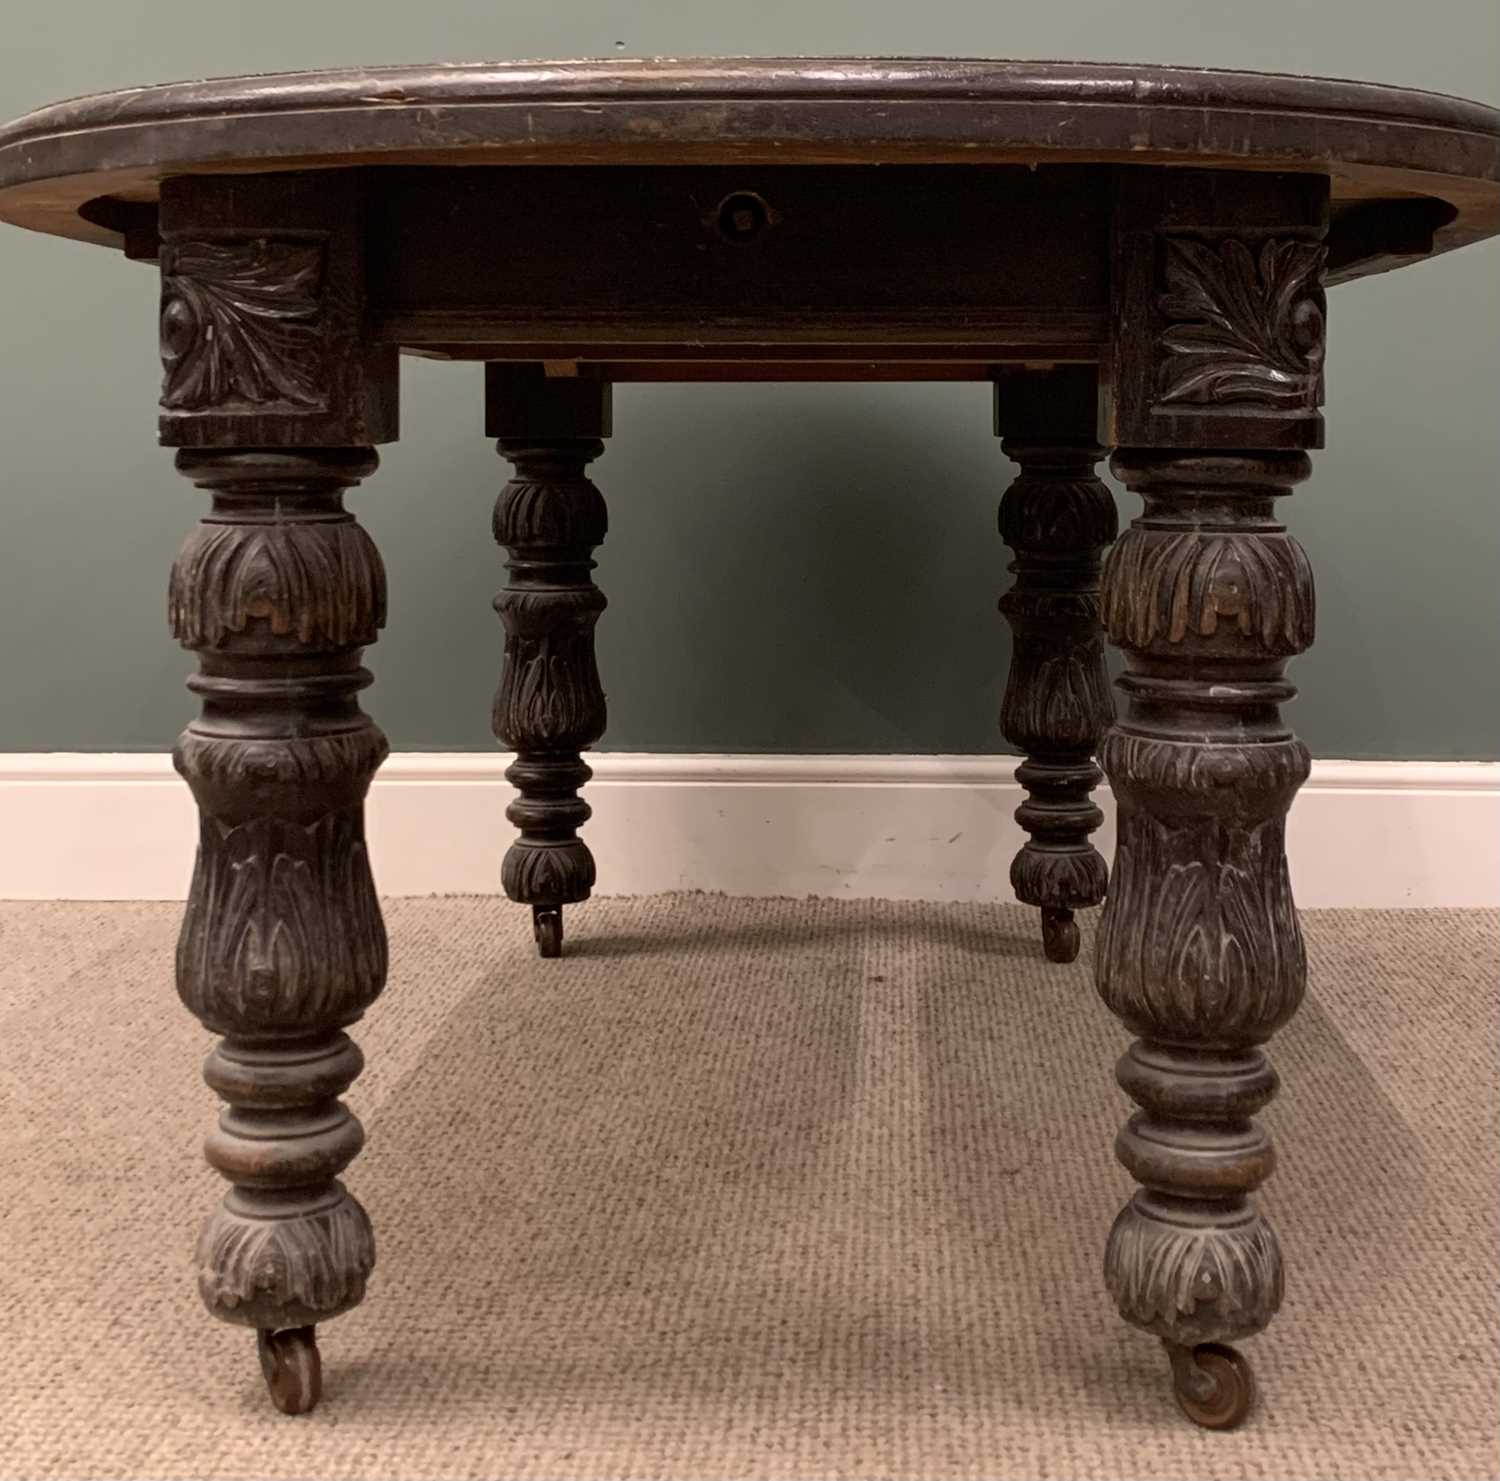 EDWARDIAN GOTHIC STYLE OAK CARVED DINING TABLE & SET OF SIX CHAIRS, 74 (h) x 163 (w) x 106cms (d) - Image 2 of 7